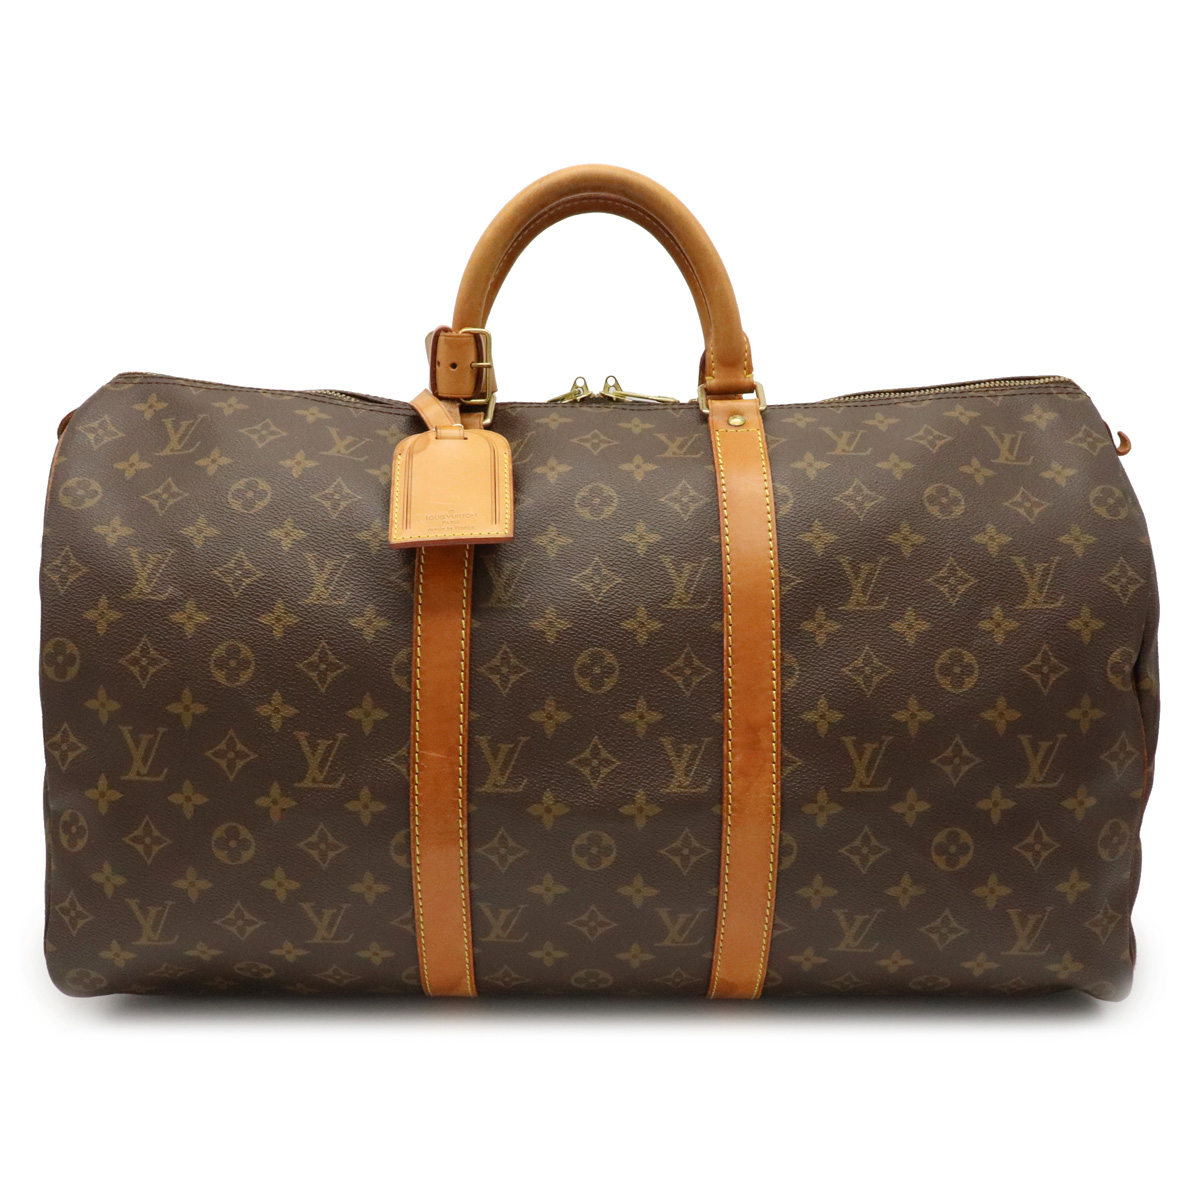 SALE／91%OFF】 LOUIS VUITTON ルイヴィトン キーポル50 ボストン ...